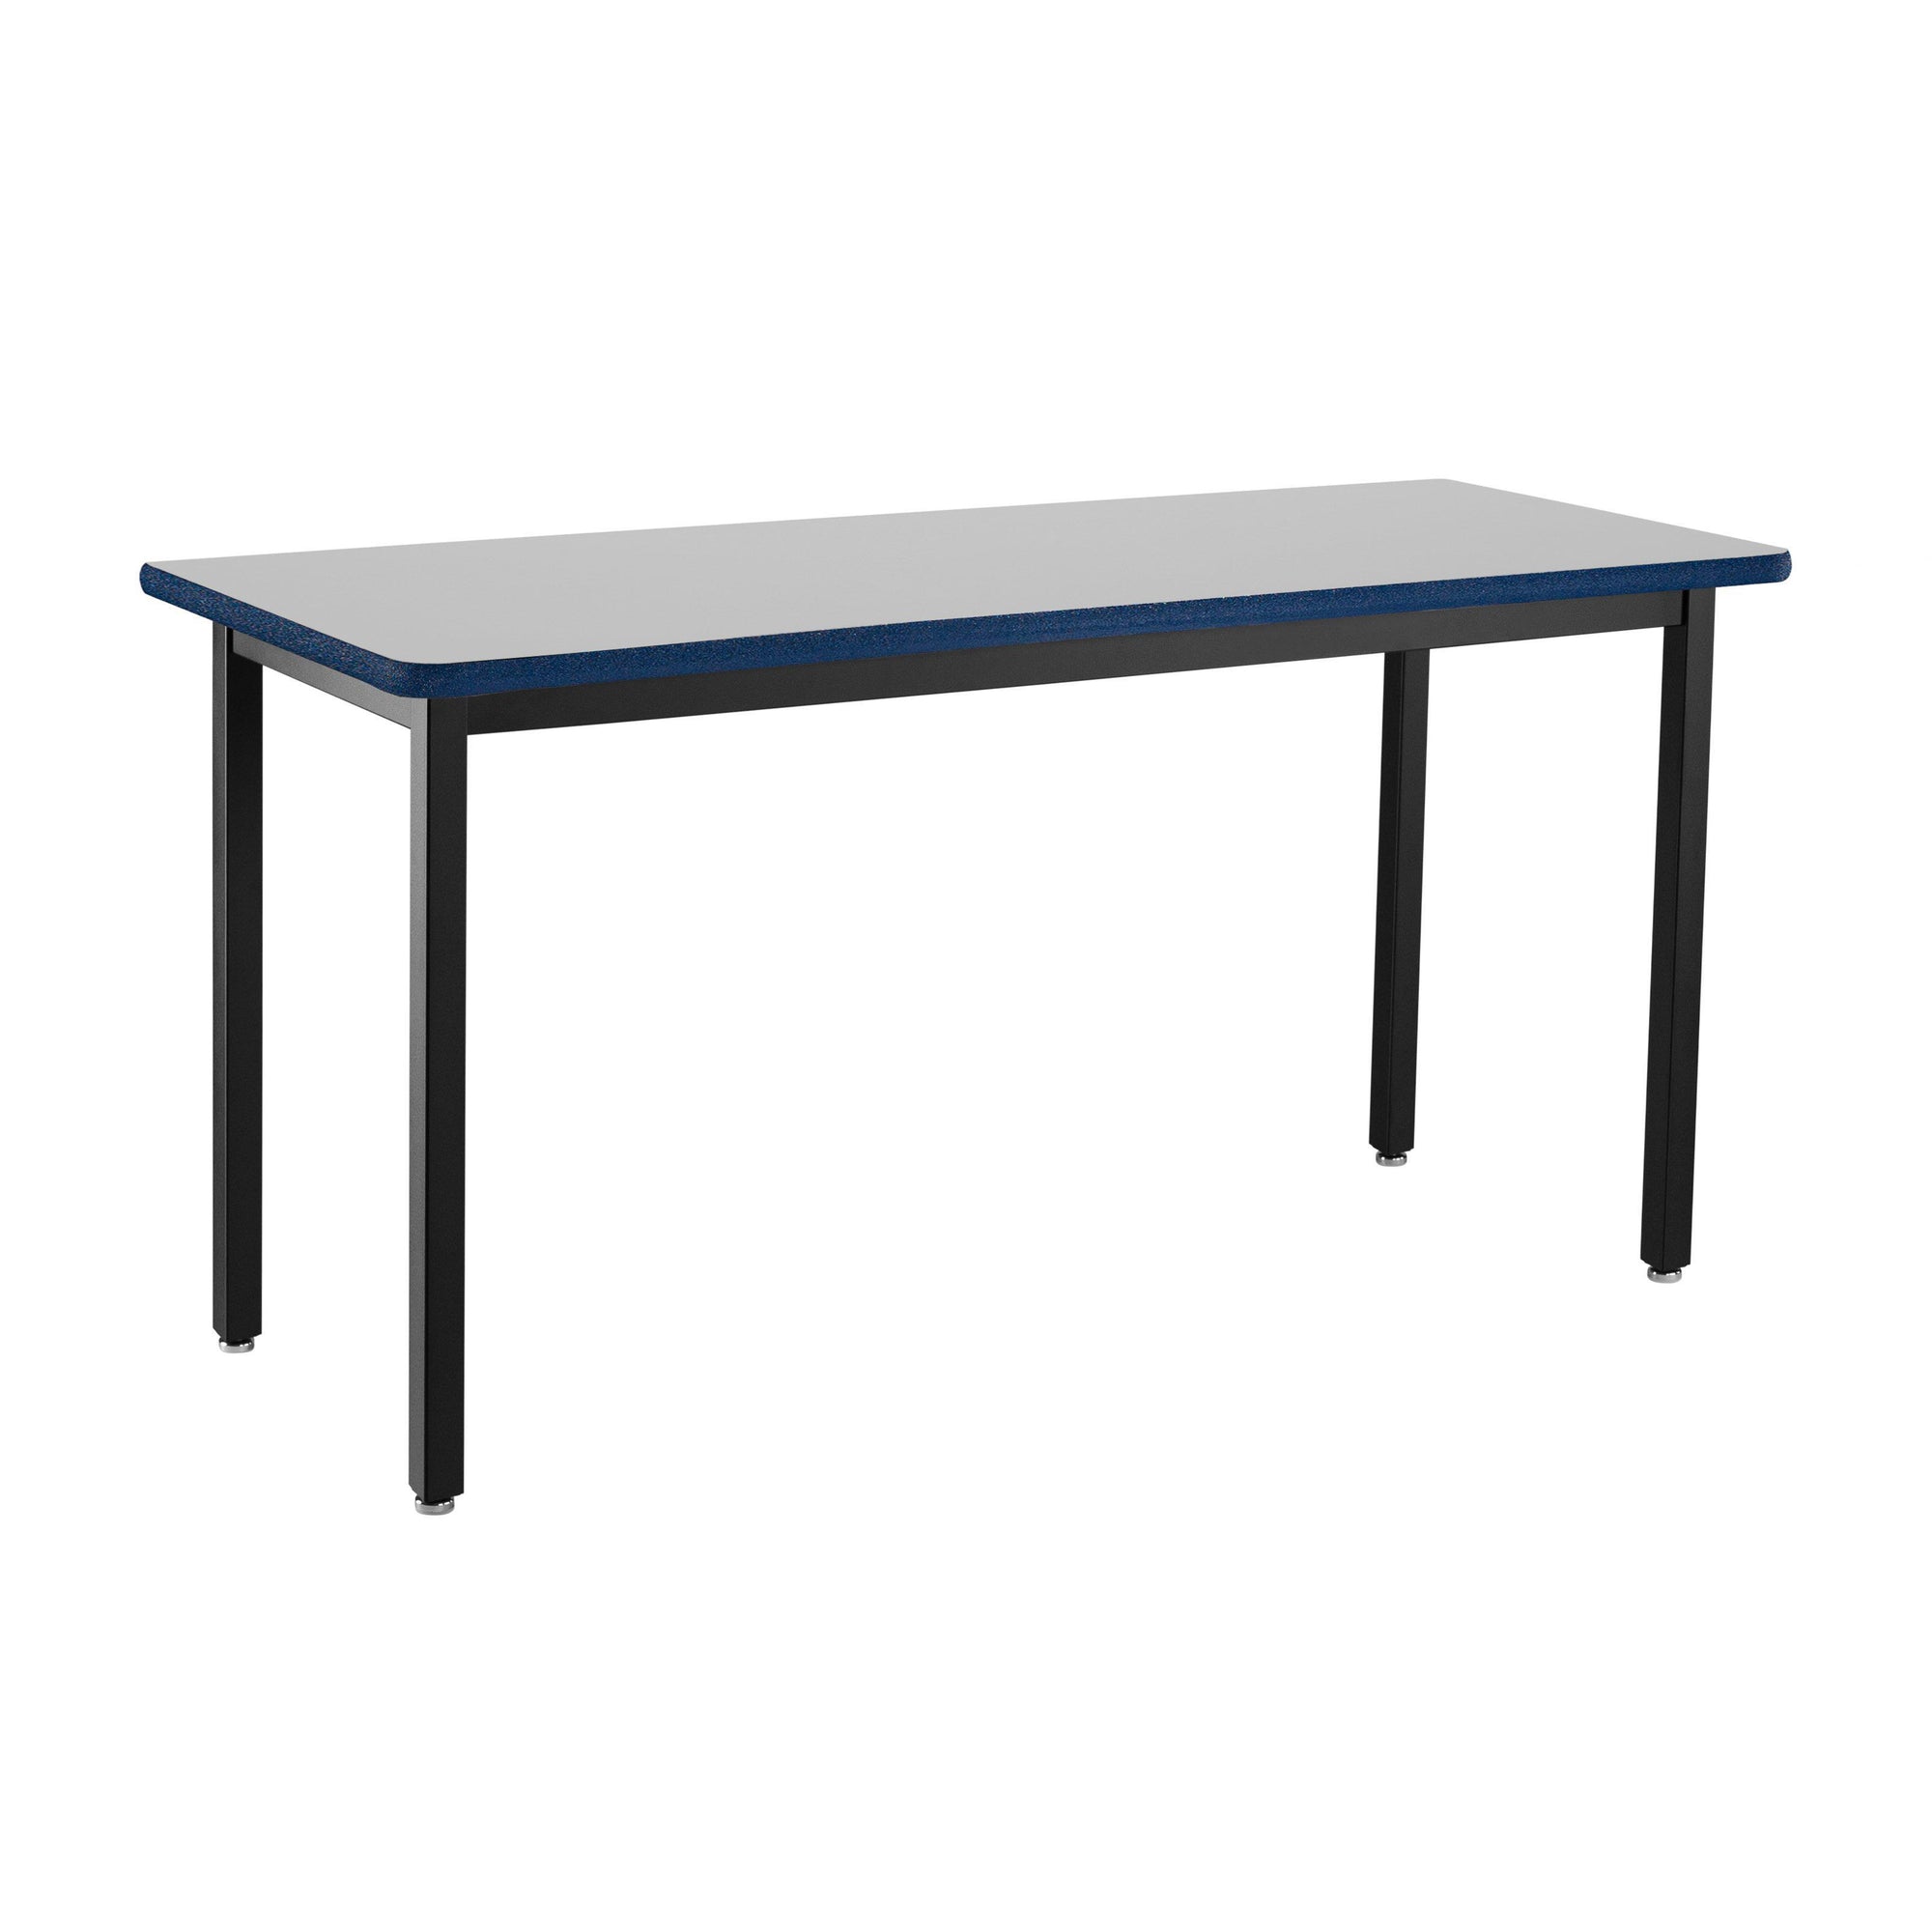 Heavy-Duty Fixed Height Utility Table, Black Frame, 24" x 48", Supreme High-Pressure Laminate Top with Black ProtectEdge